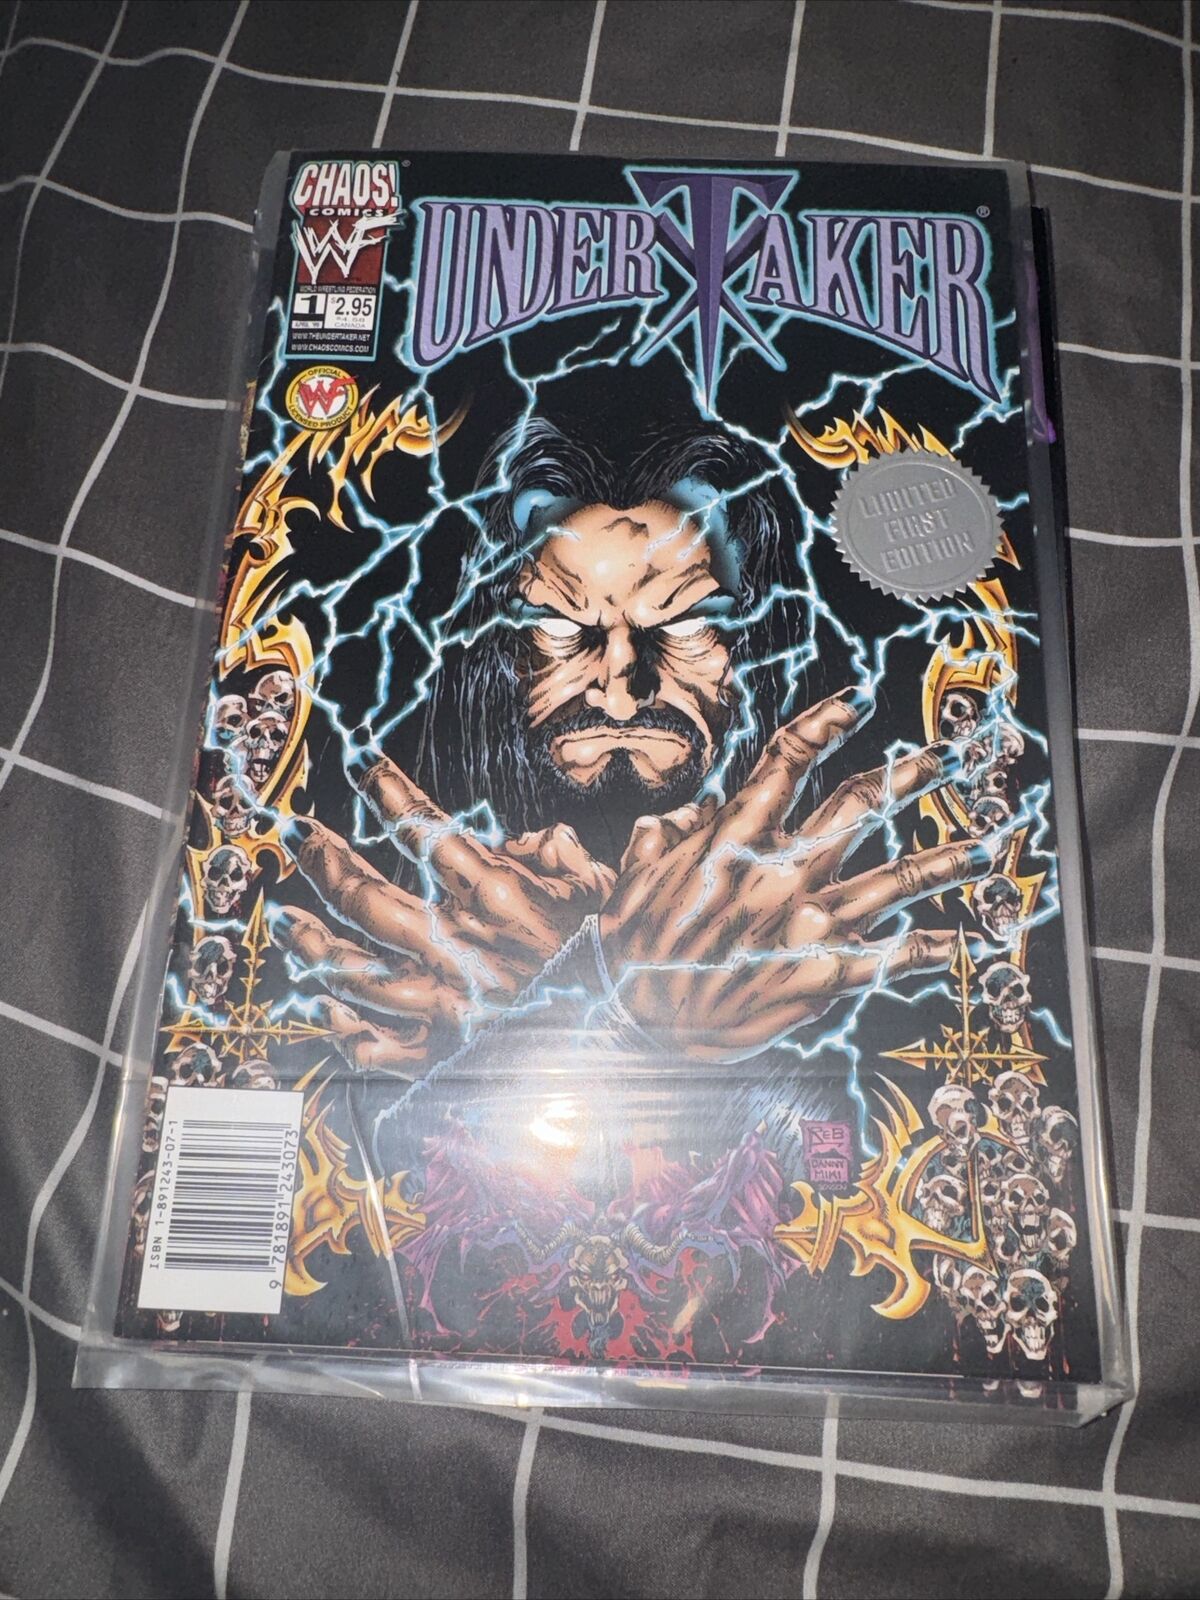 Undertaker #1-6 Comic - Chaos Comics (April 1999) Limited First Edition WWF WWE